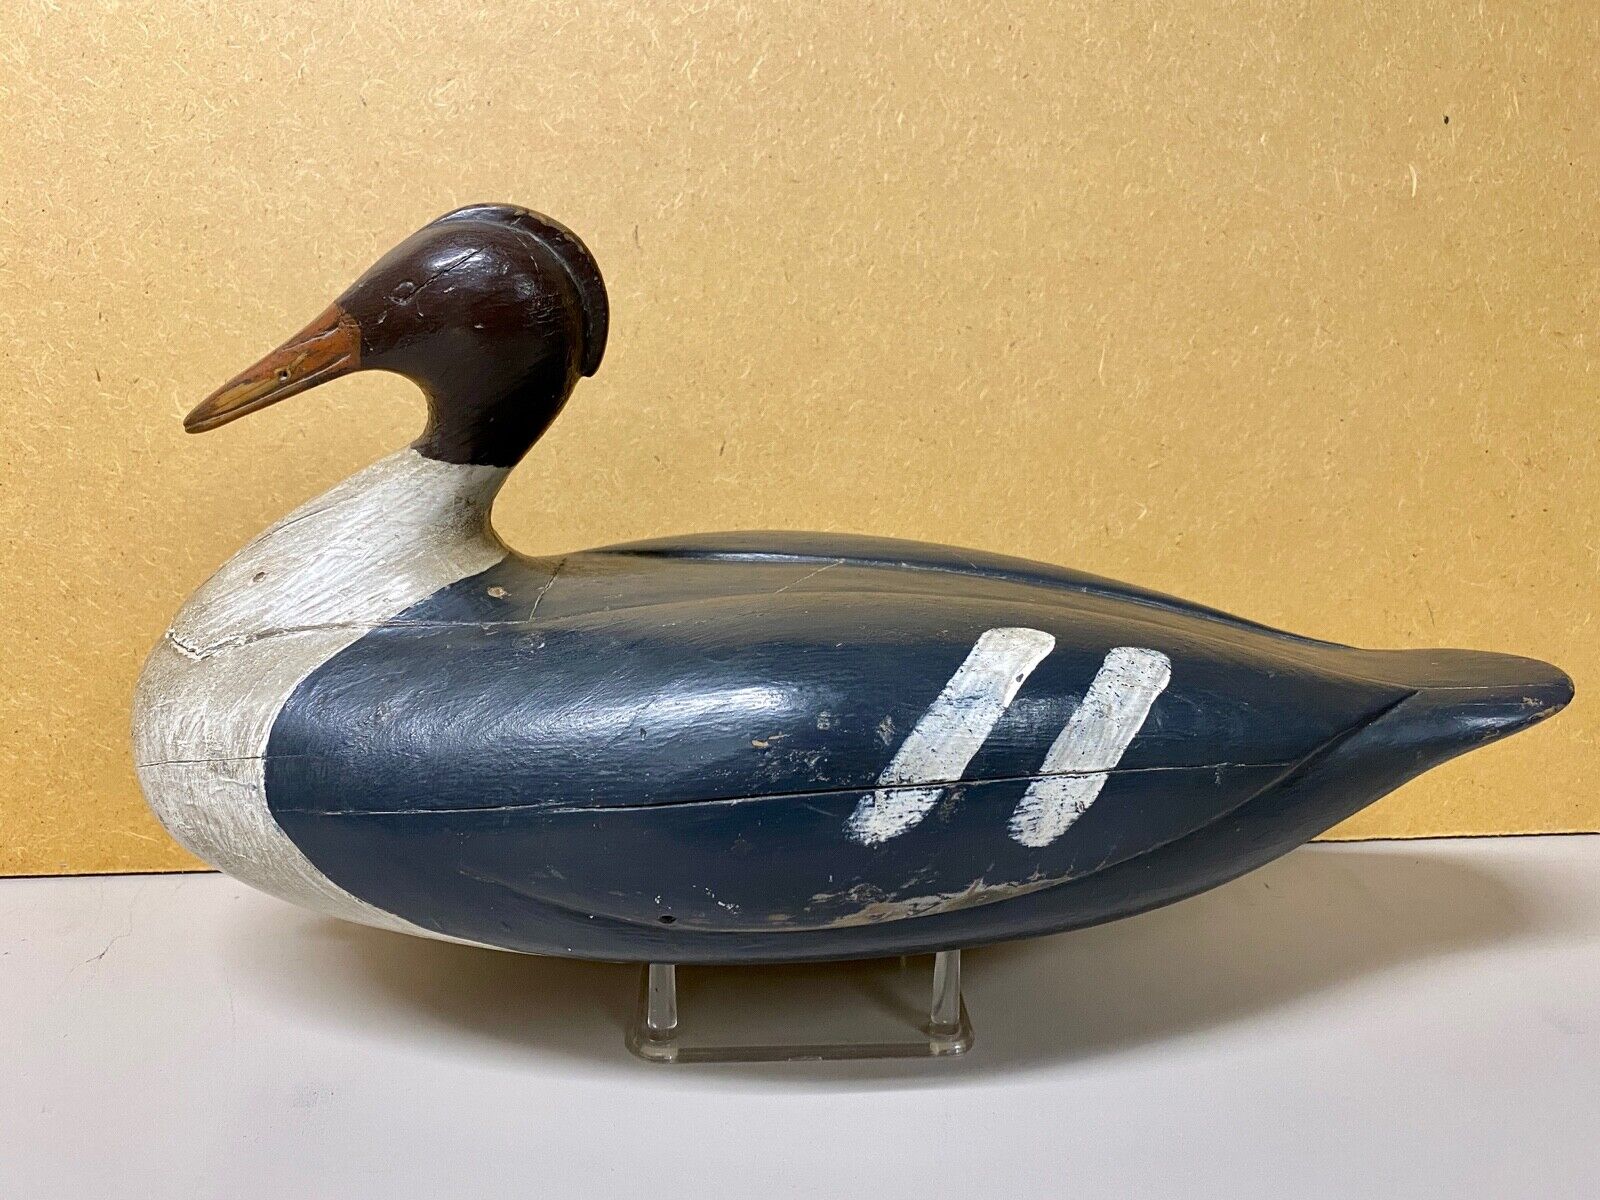 Red Breasted Merganser Duck Decoy (hen) by Gus Wilson, South Portland, Maine